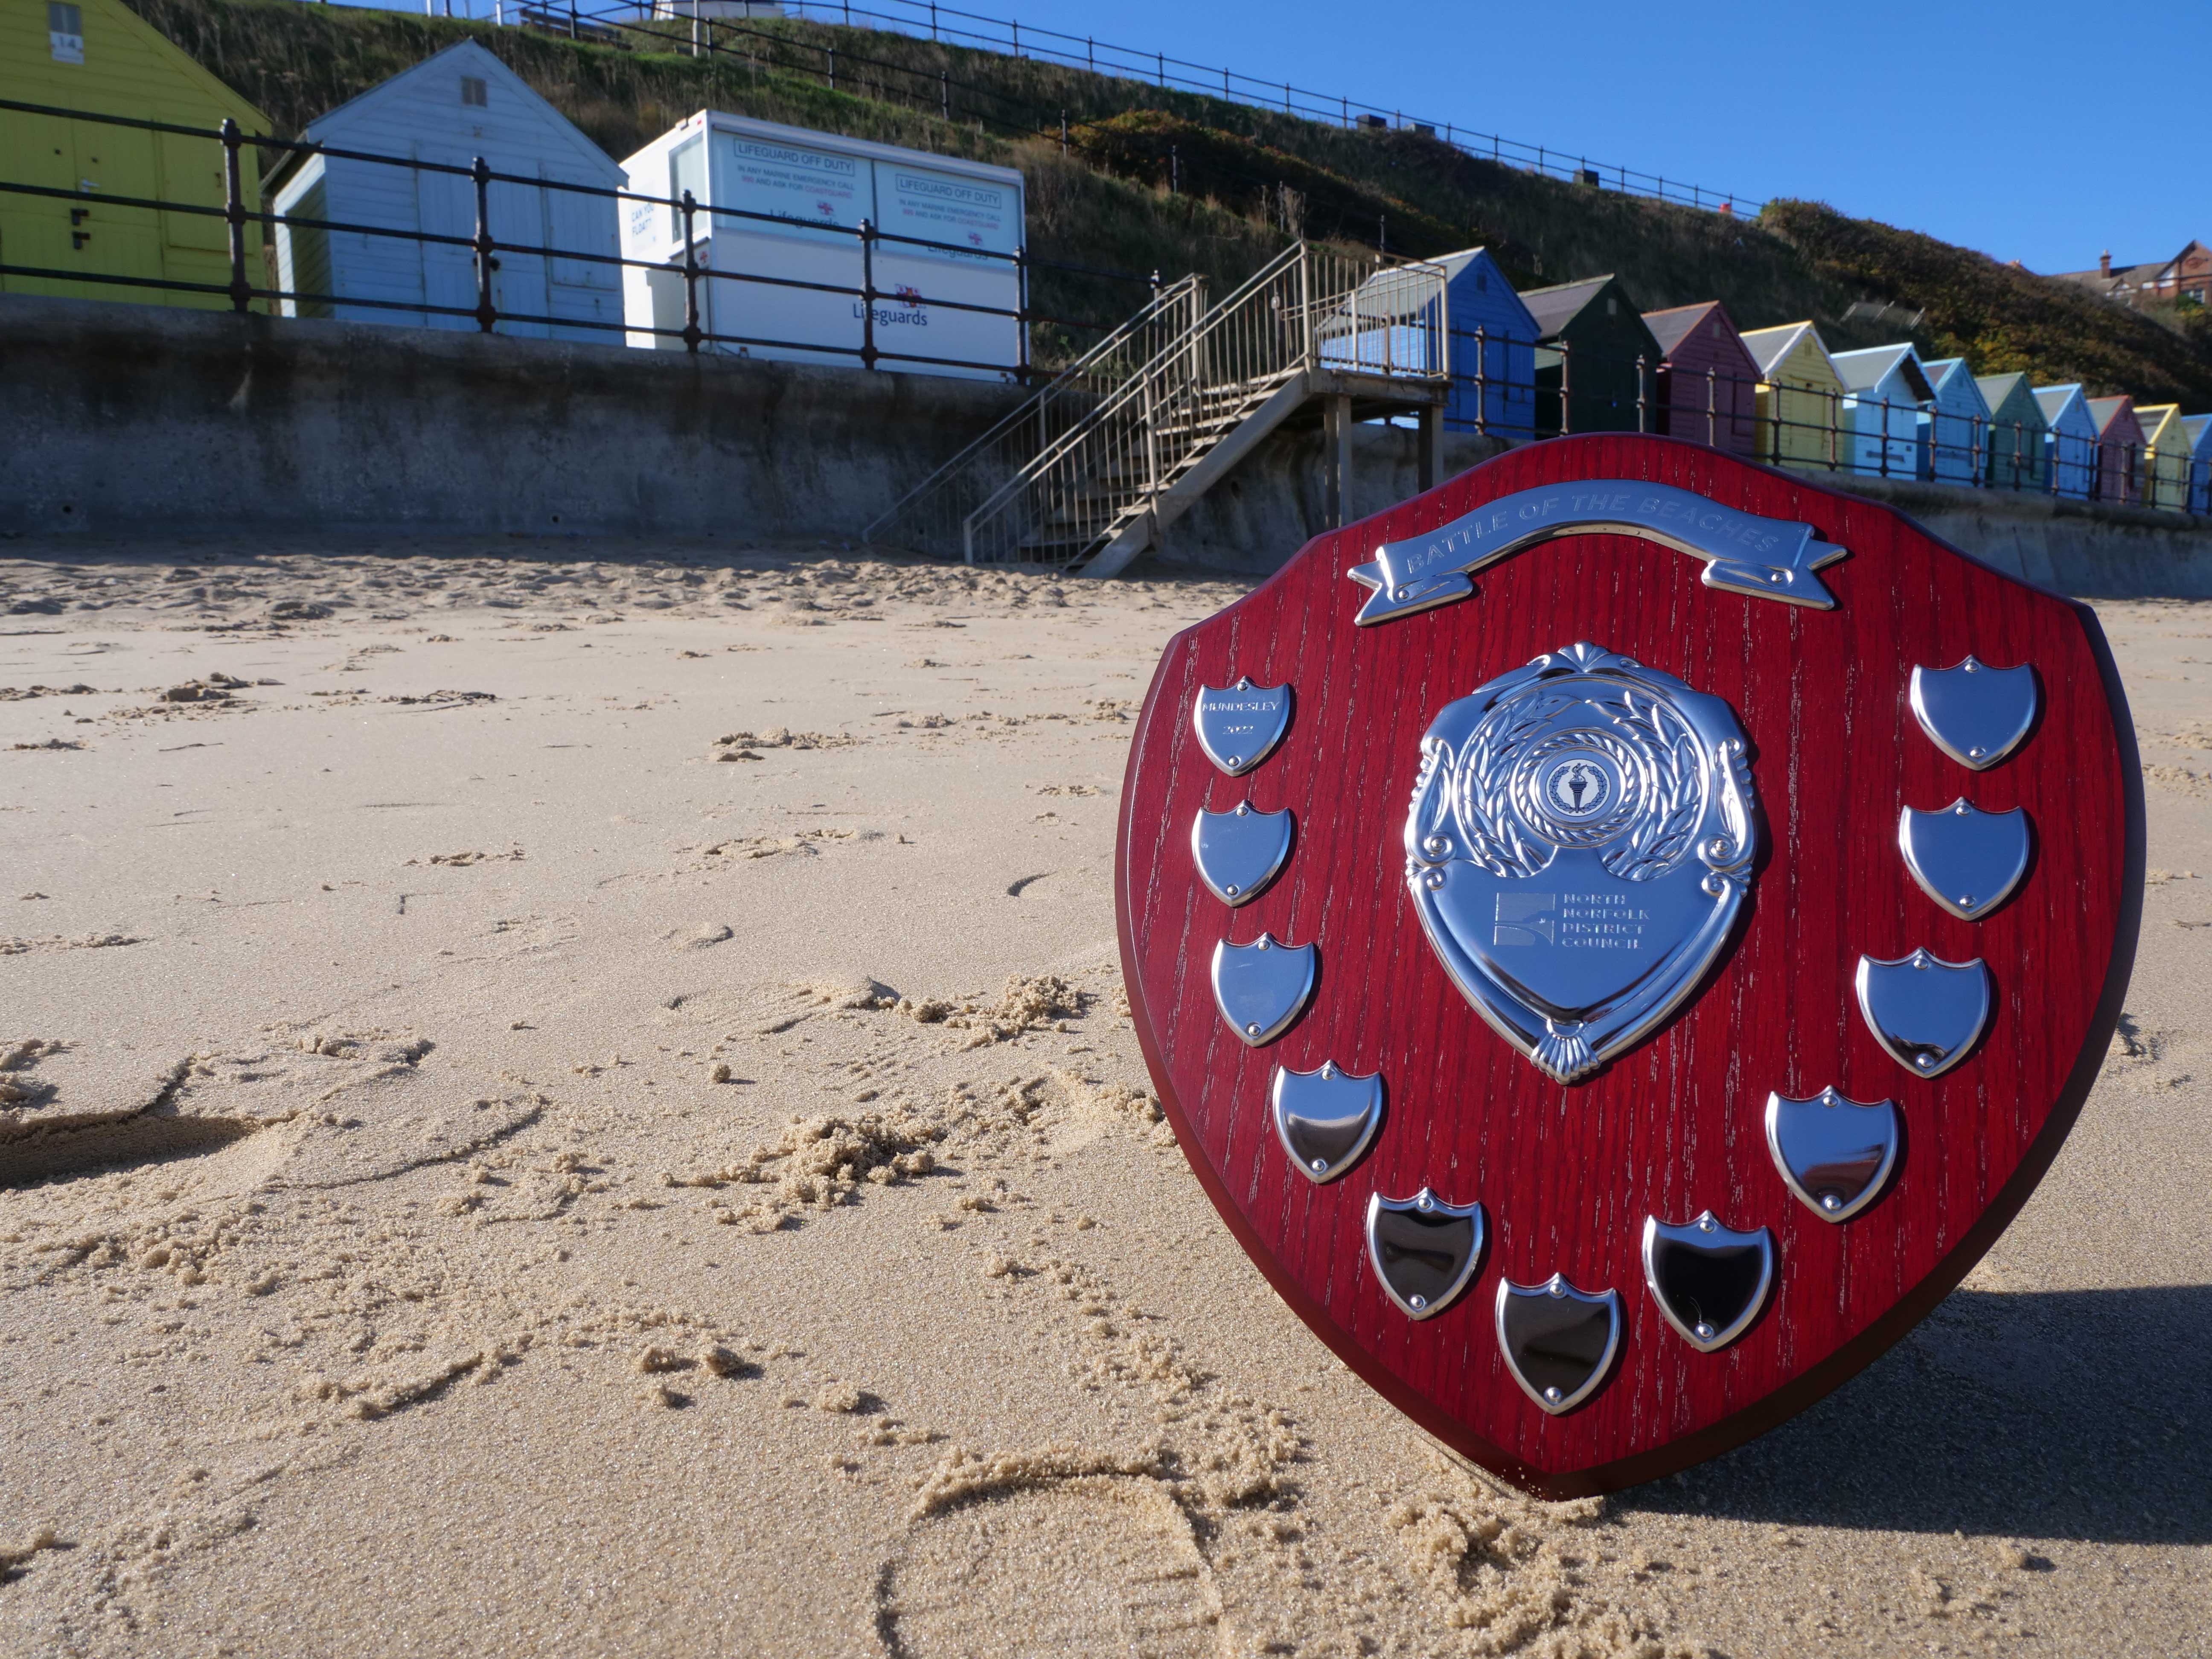 Battle of the Beaches trophy on Mundesley beach 2022